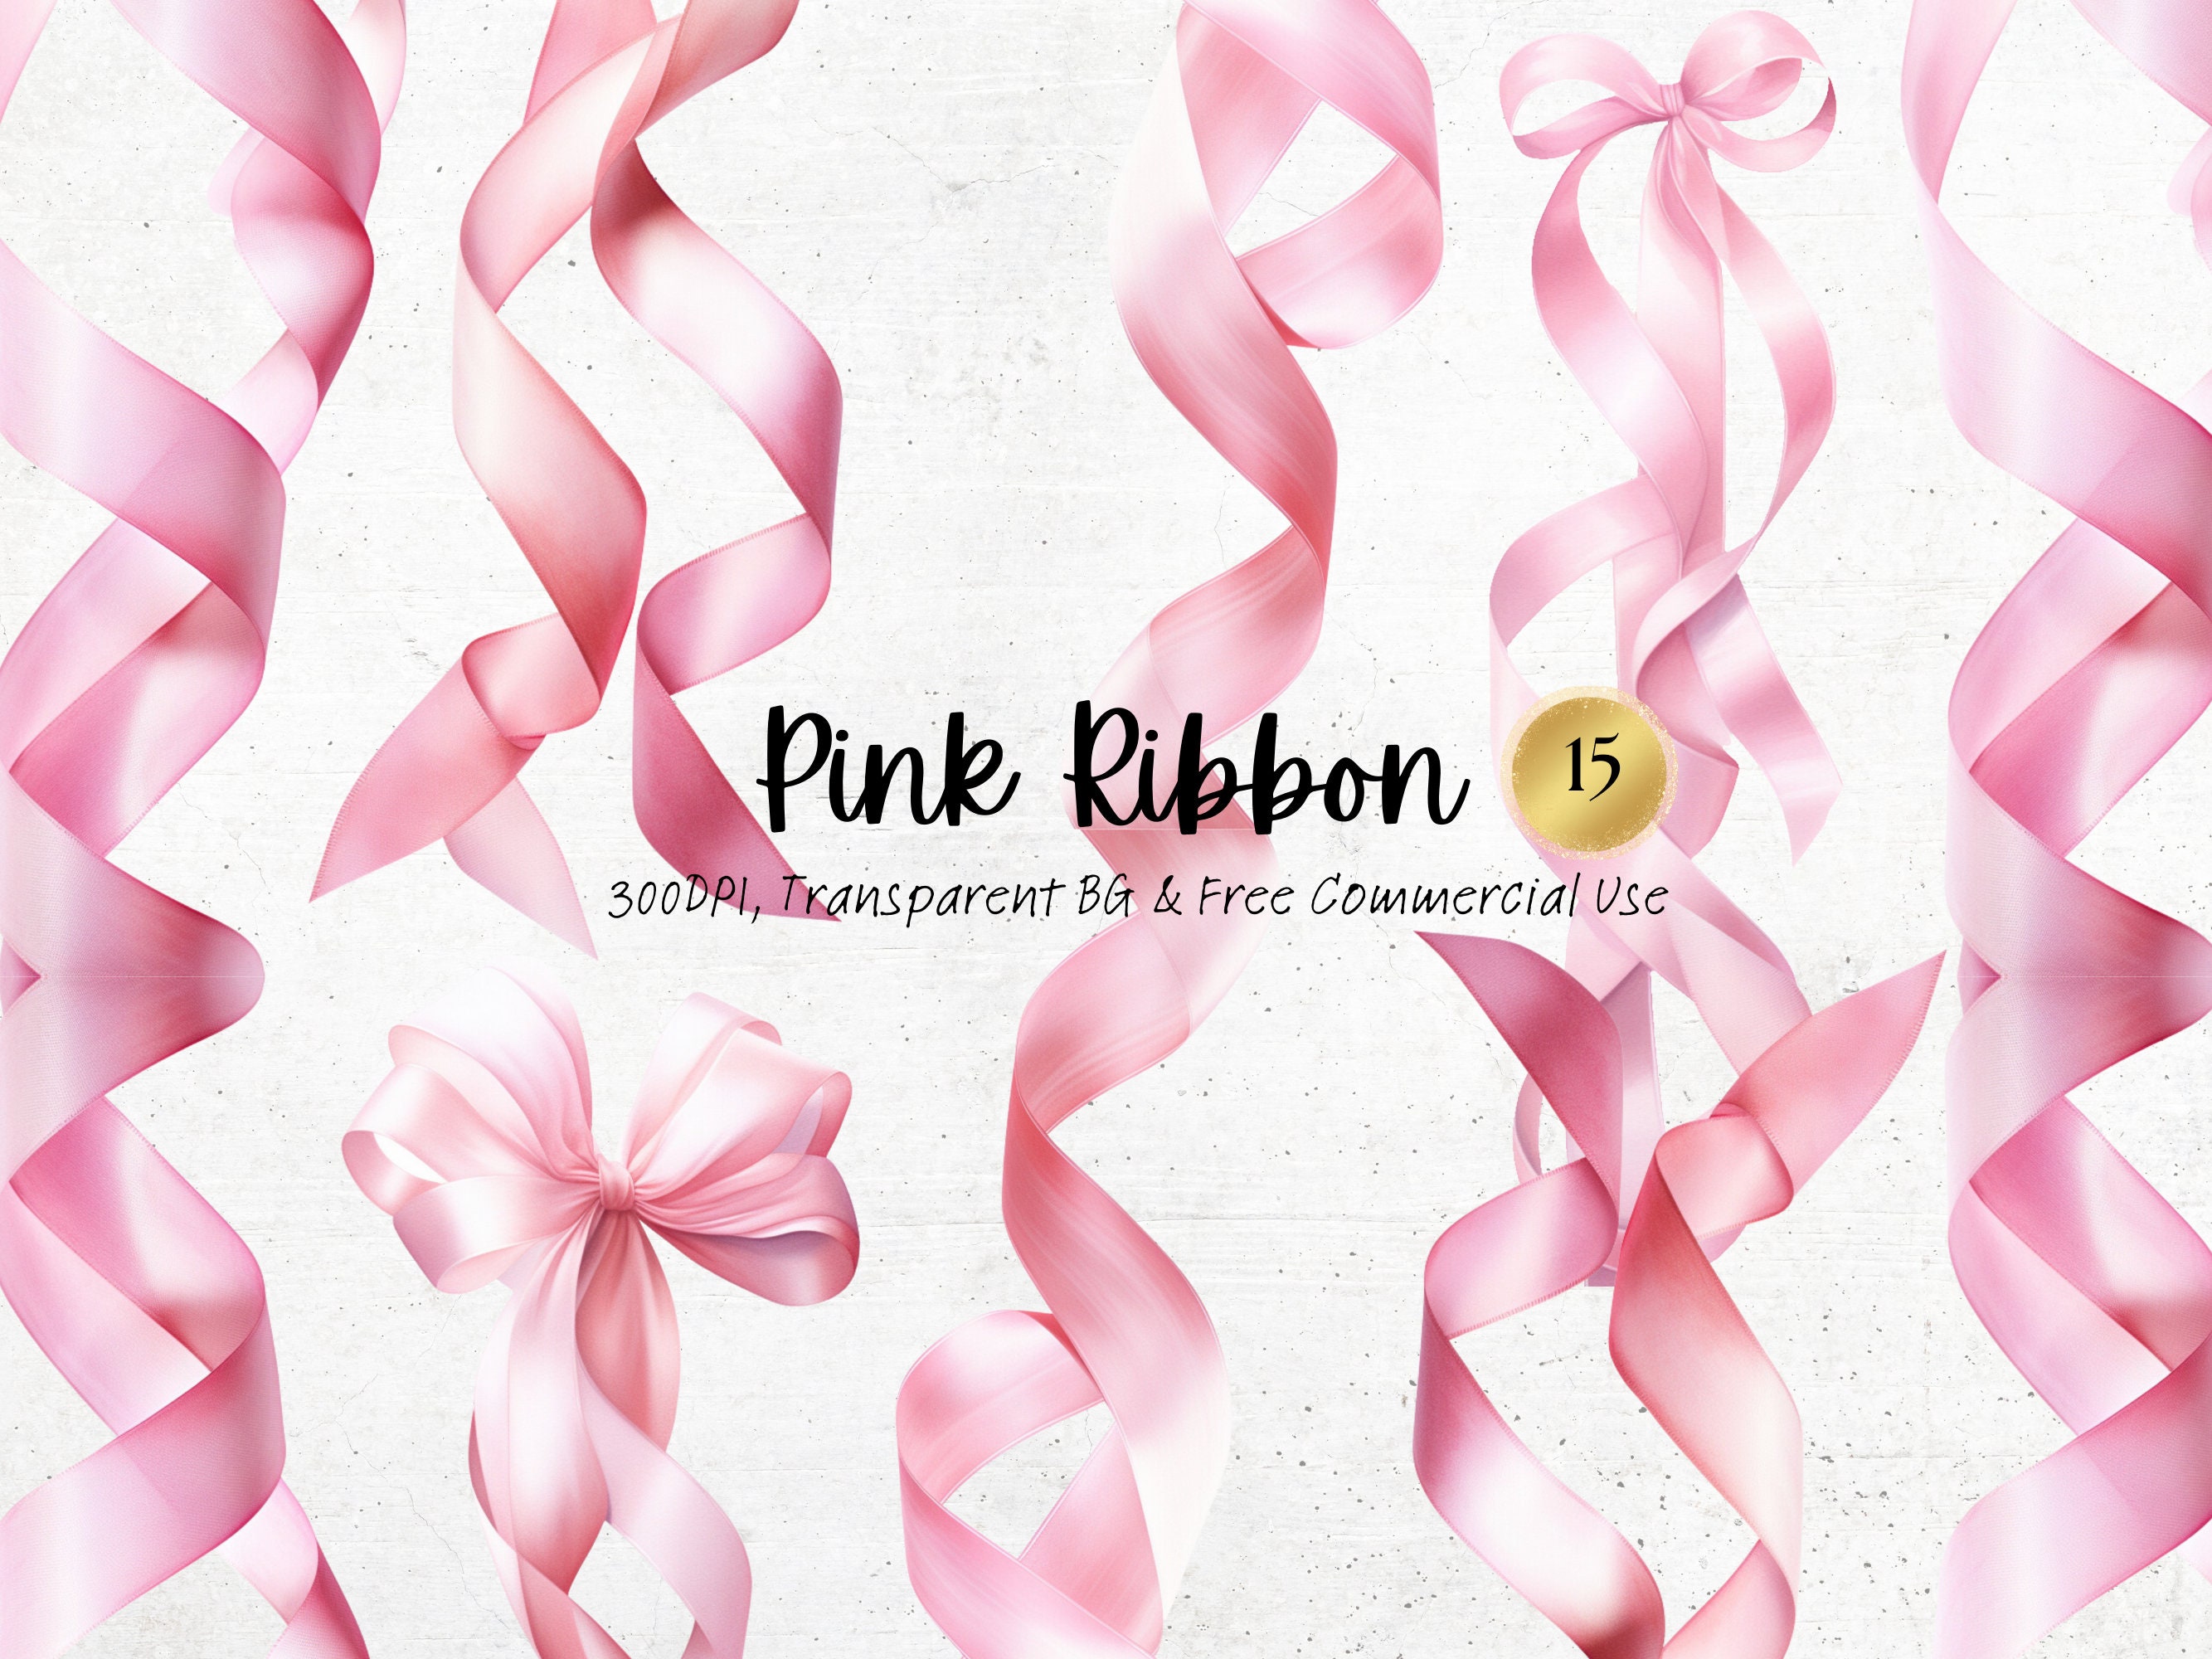 Rainbow Pastel Ribbon Clip Art Curling Ribbons in Png Format Instant  Download for Commercial Use 